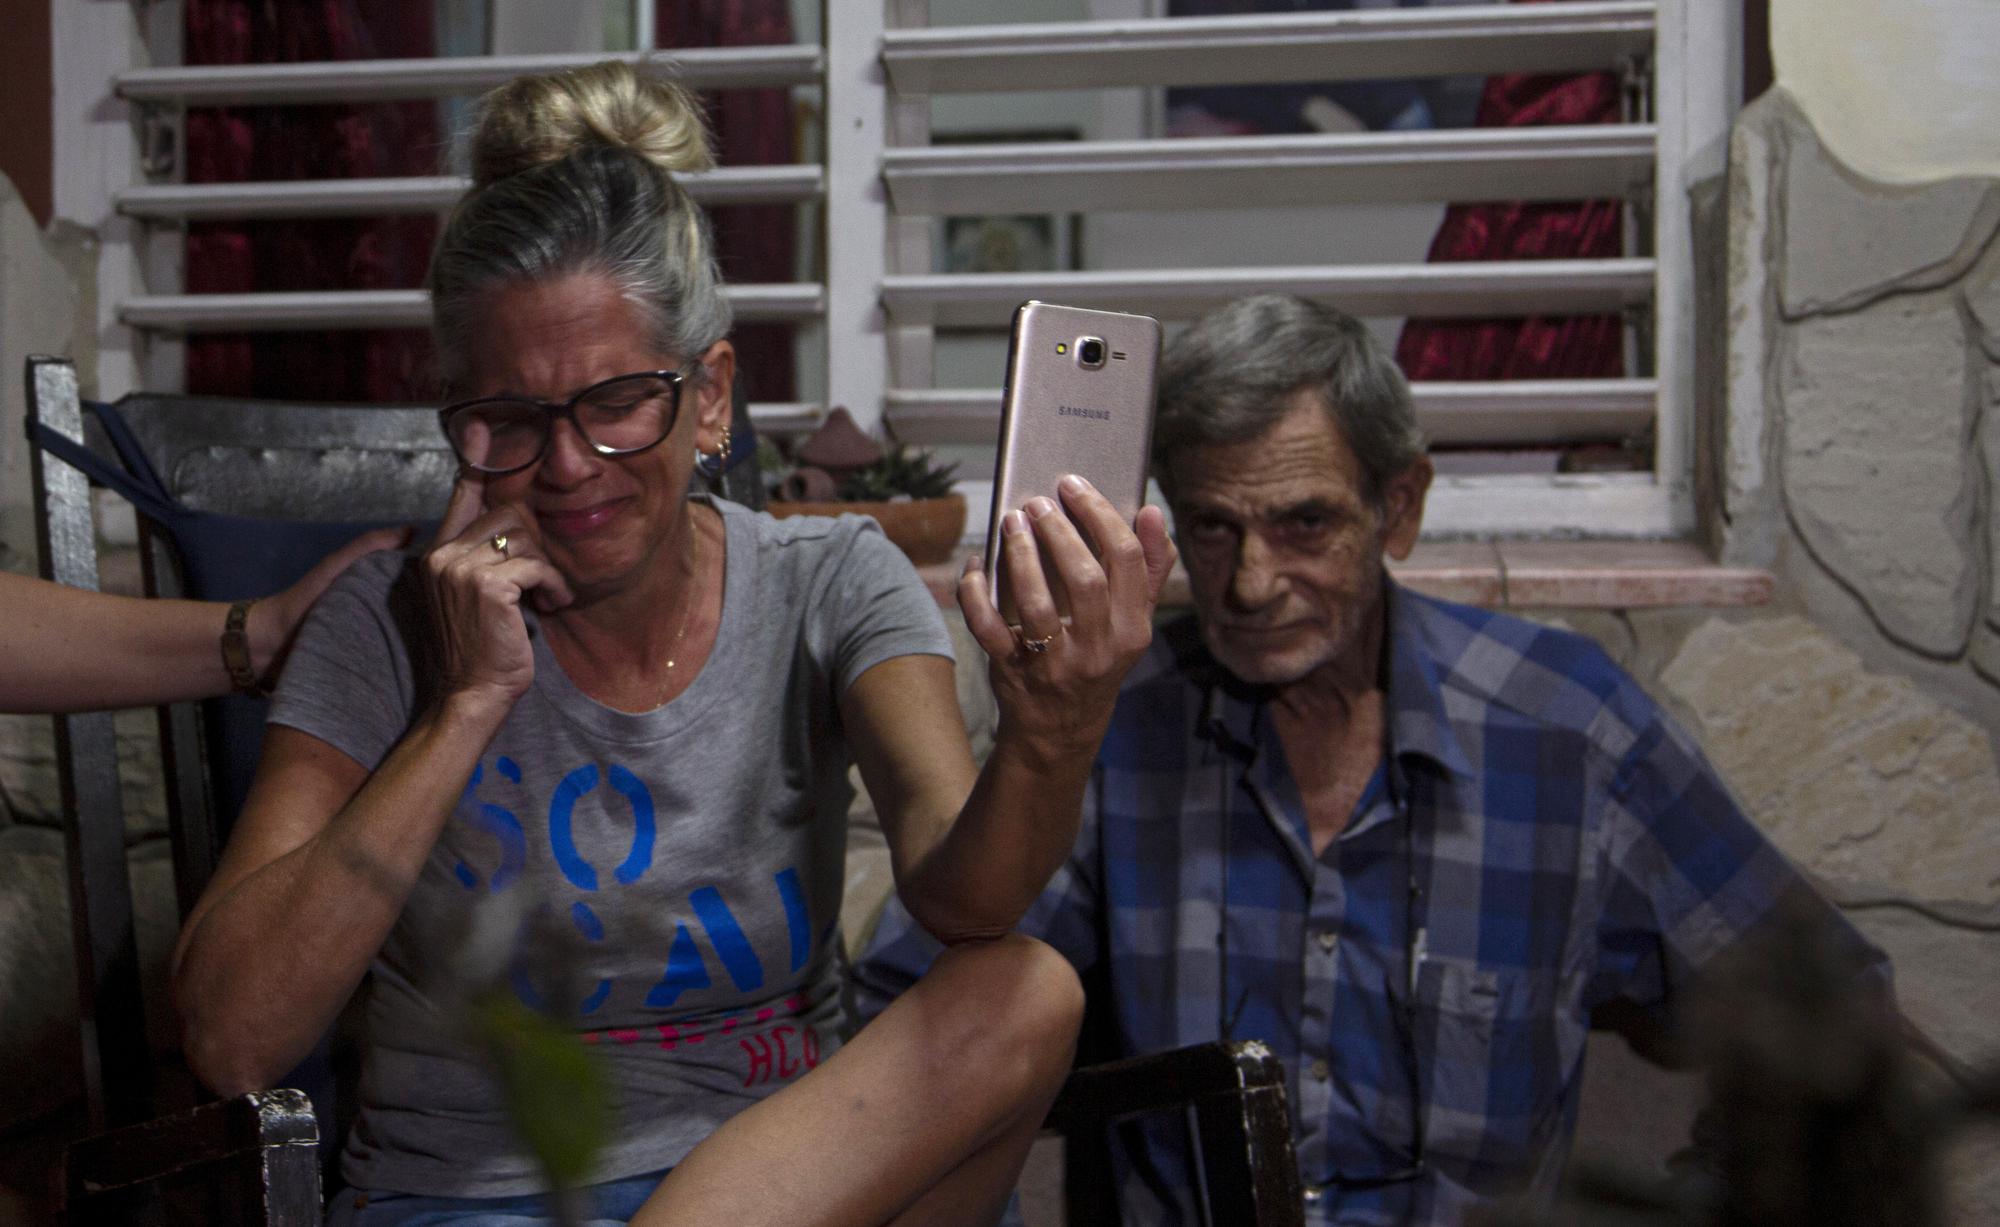 Marialys Gonzalez Lopez and her father, Alejandro Gonzalez Lopez, hold a video call with her daughters Merlyn and Melanie, and Melanie's daughter, Madisson, from their home in Havana, Cuba, Tuesday, Jan. 3, 2023. The sisters arrived days earlier in the U.S., after a three-week journey through Central America and Mexico. During that time, their mother clung to texts and photos as signs they were okay. (AP Photo/Ismael Francisco)